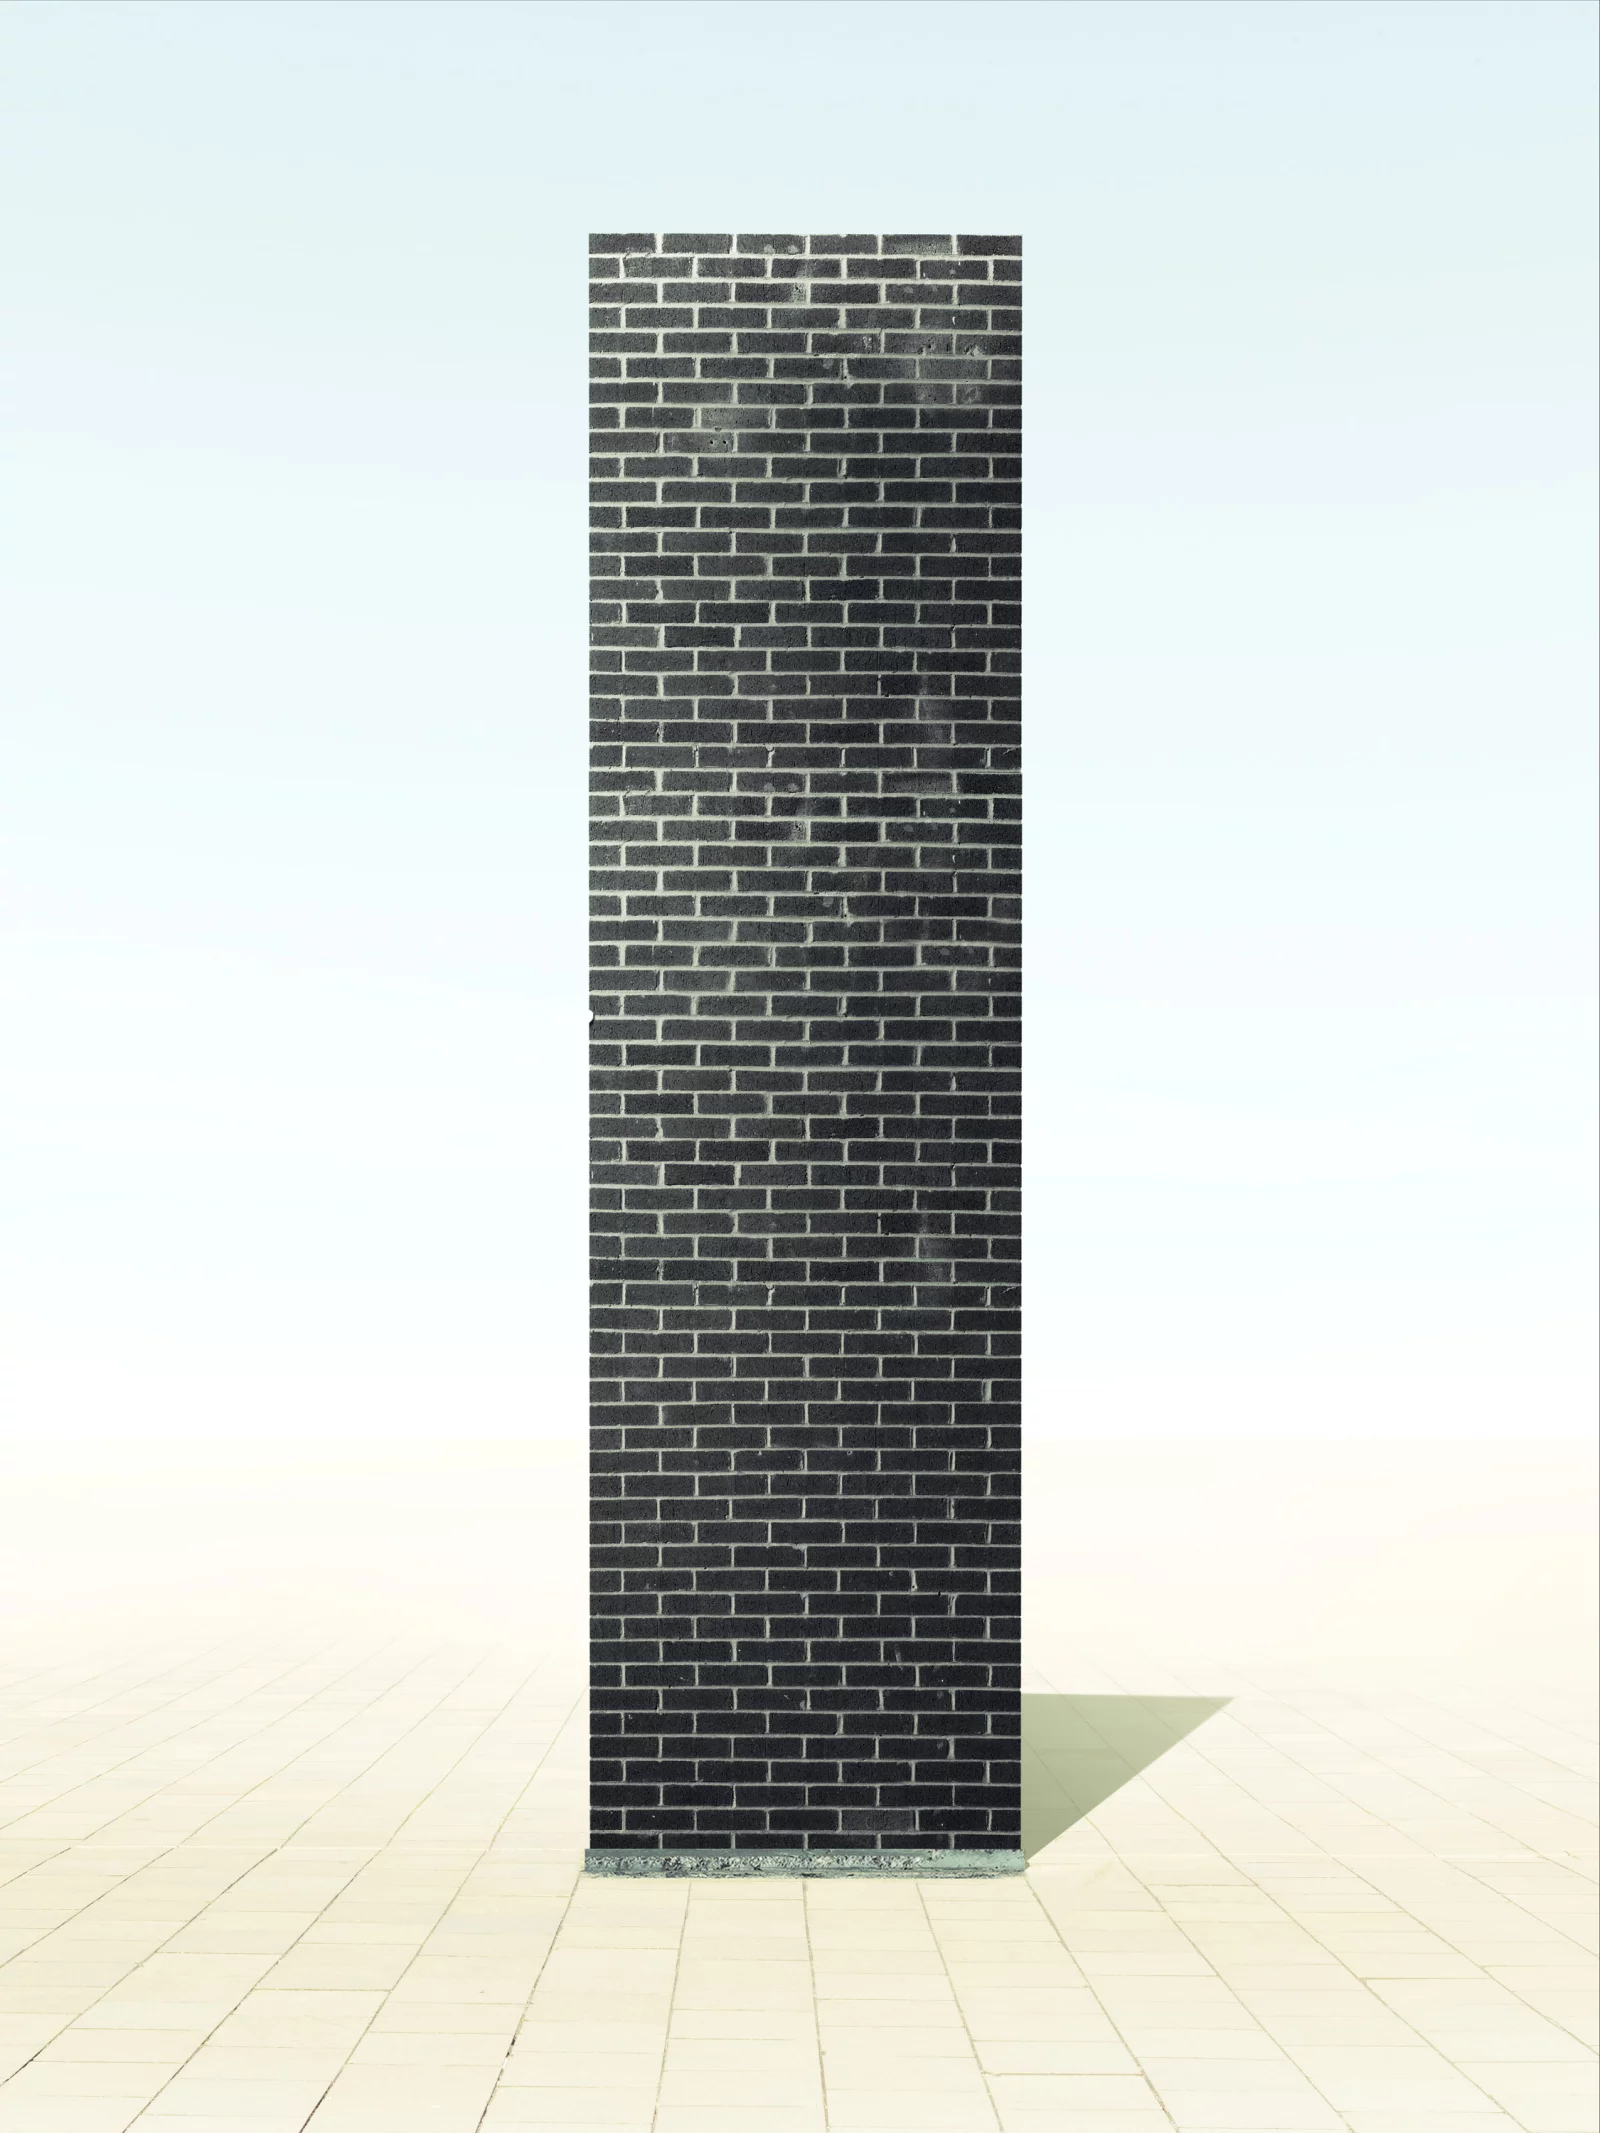 Mystery Monoliths 1 by Clemens ASCHER